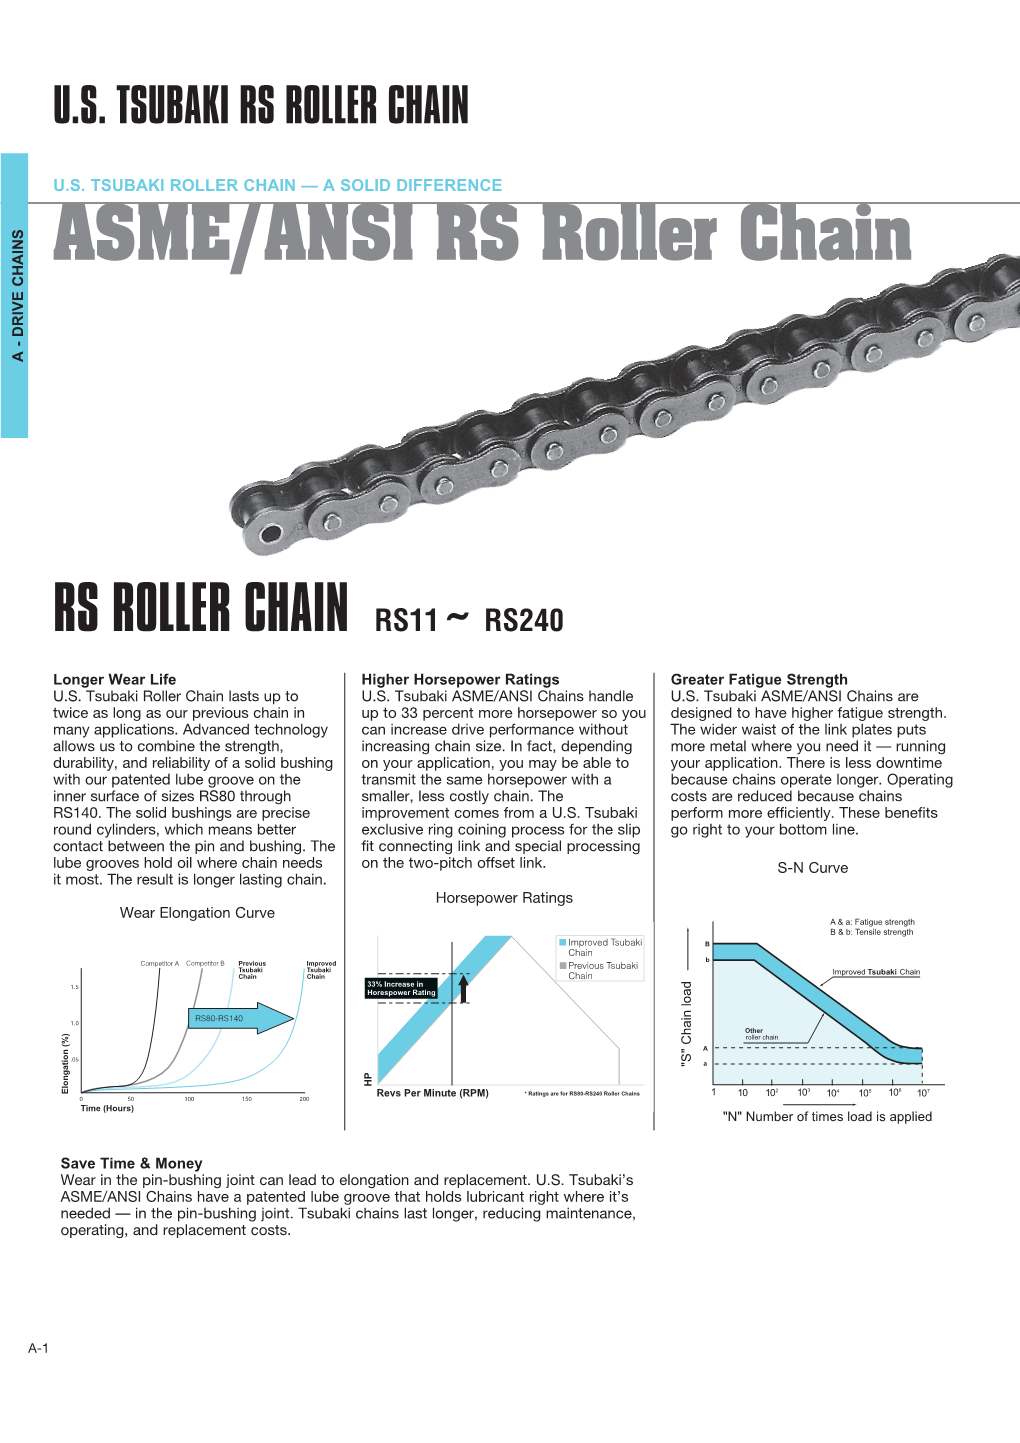 ASME/ANSI RS Roller Chain Technical Information